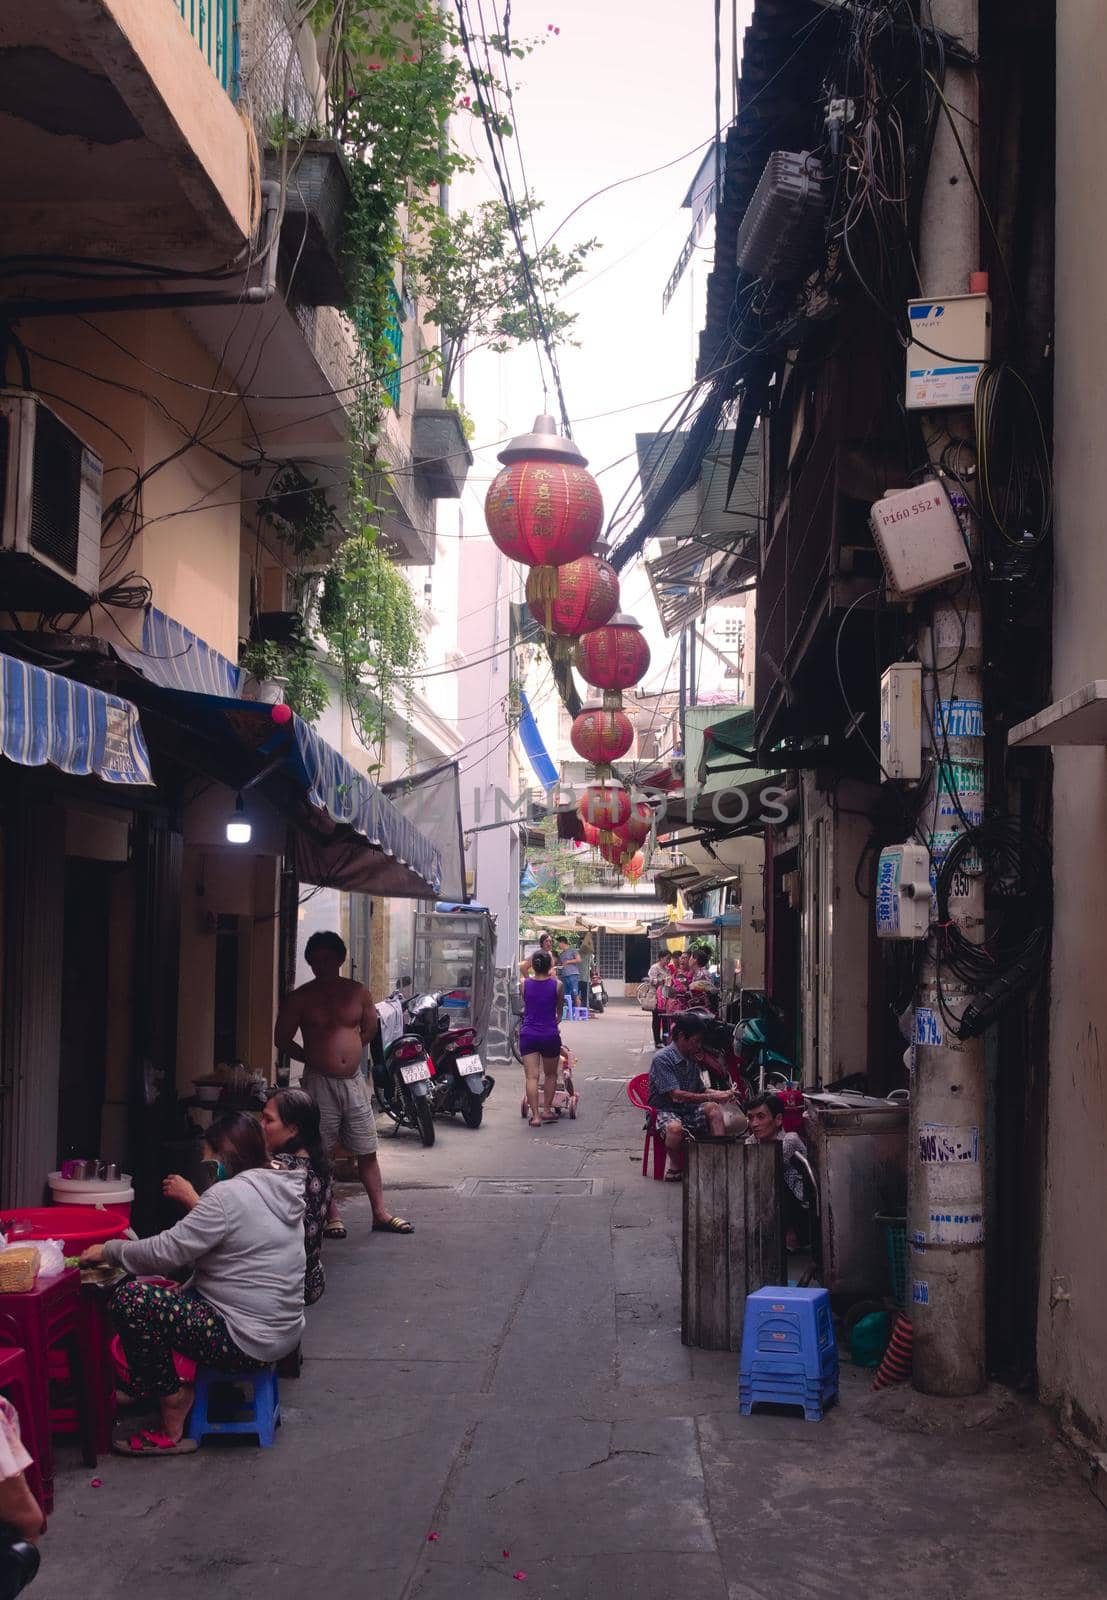 2019-11-10 / Ho Chi Minh City, Vietnam - Everyday life scene. Narrow back alley in a poor area of the city. by hernan_hyper